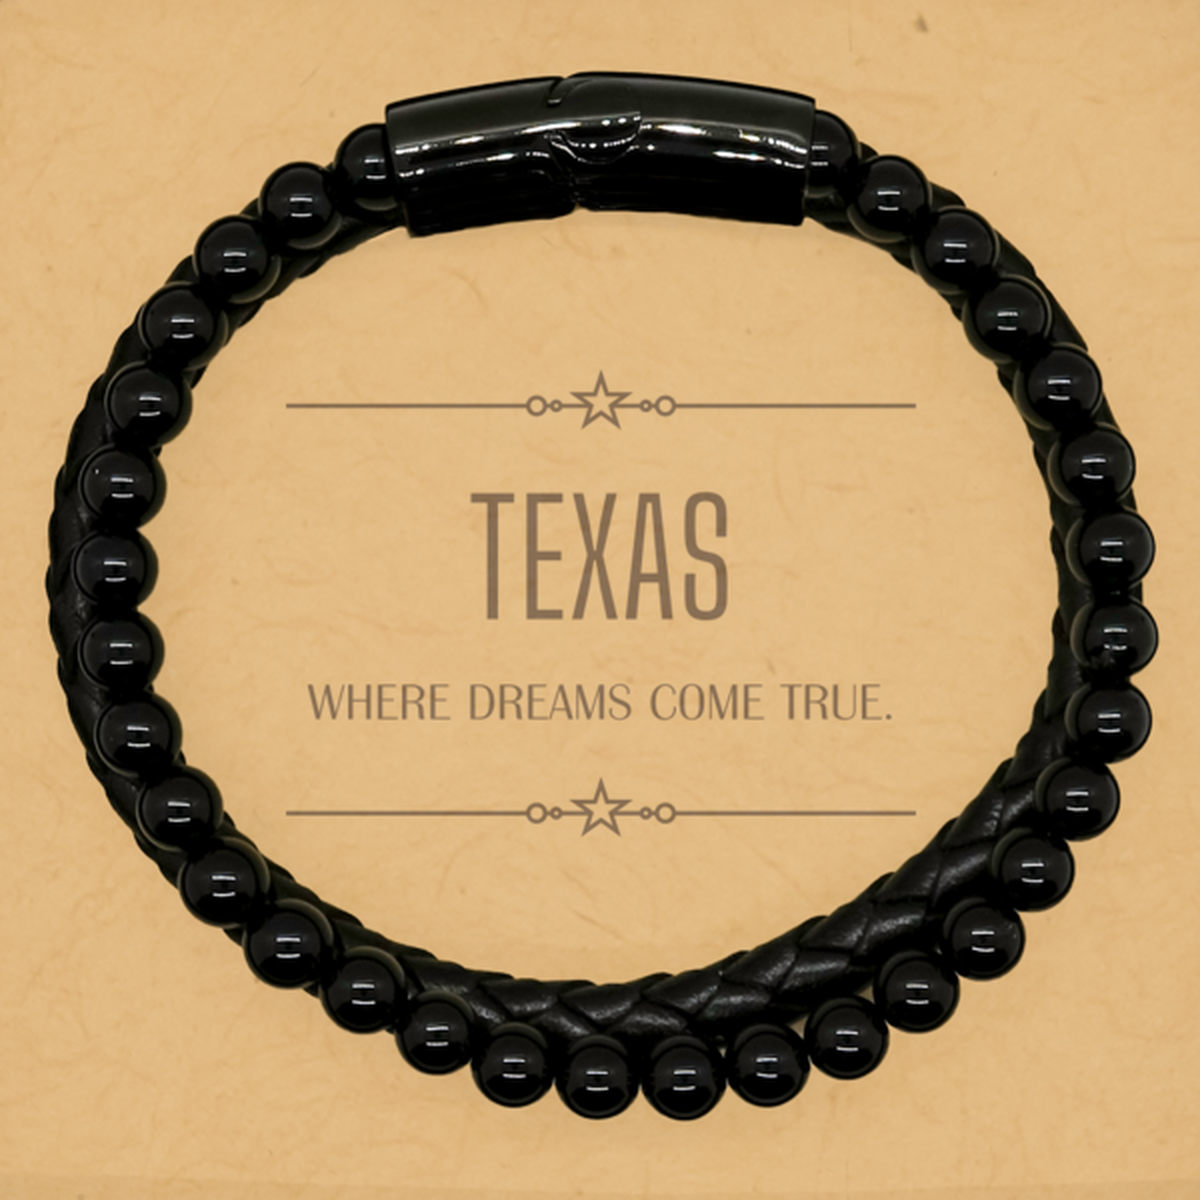 Love Texas State Stone Leather Bracelets, Texas Where dreams come true, Birthday Inspirational Gifts For Texas Men, Women, Friends